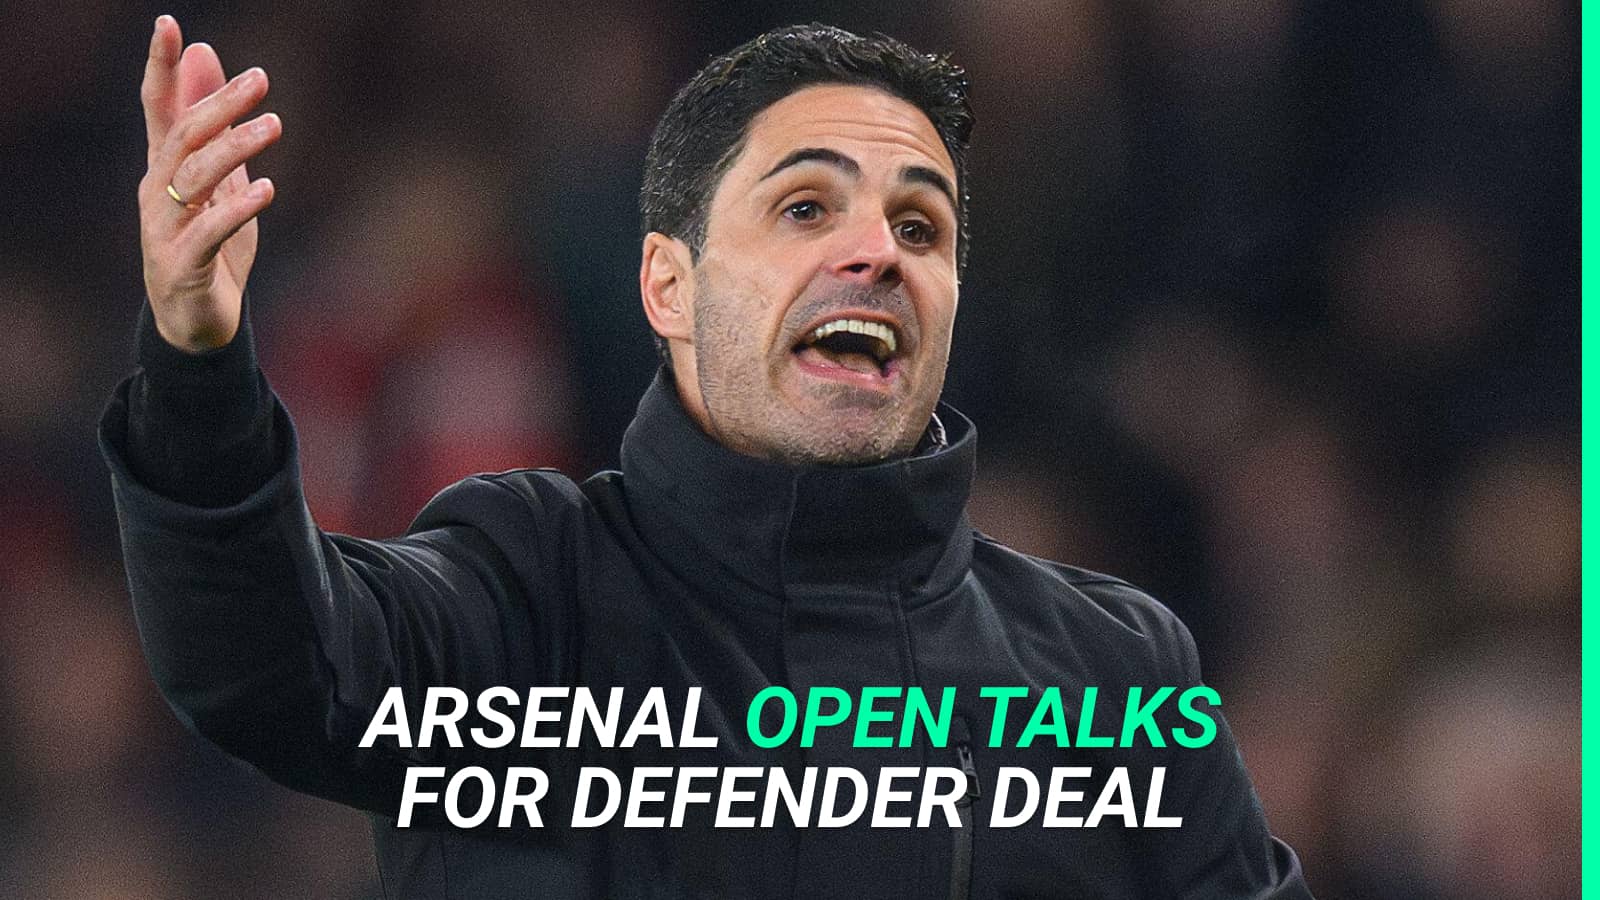 Arsenal open talks over amazing defender deal as Arteta aims to secure guaranteed starter